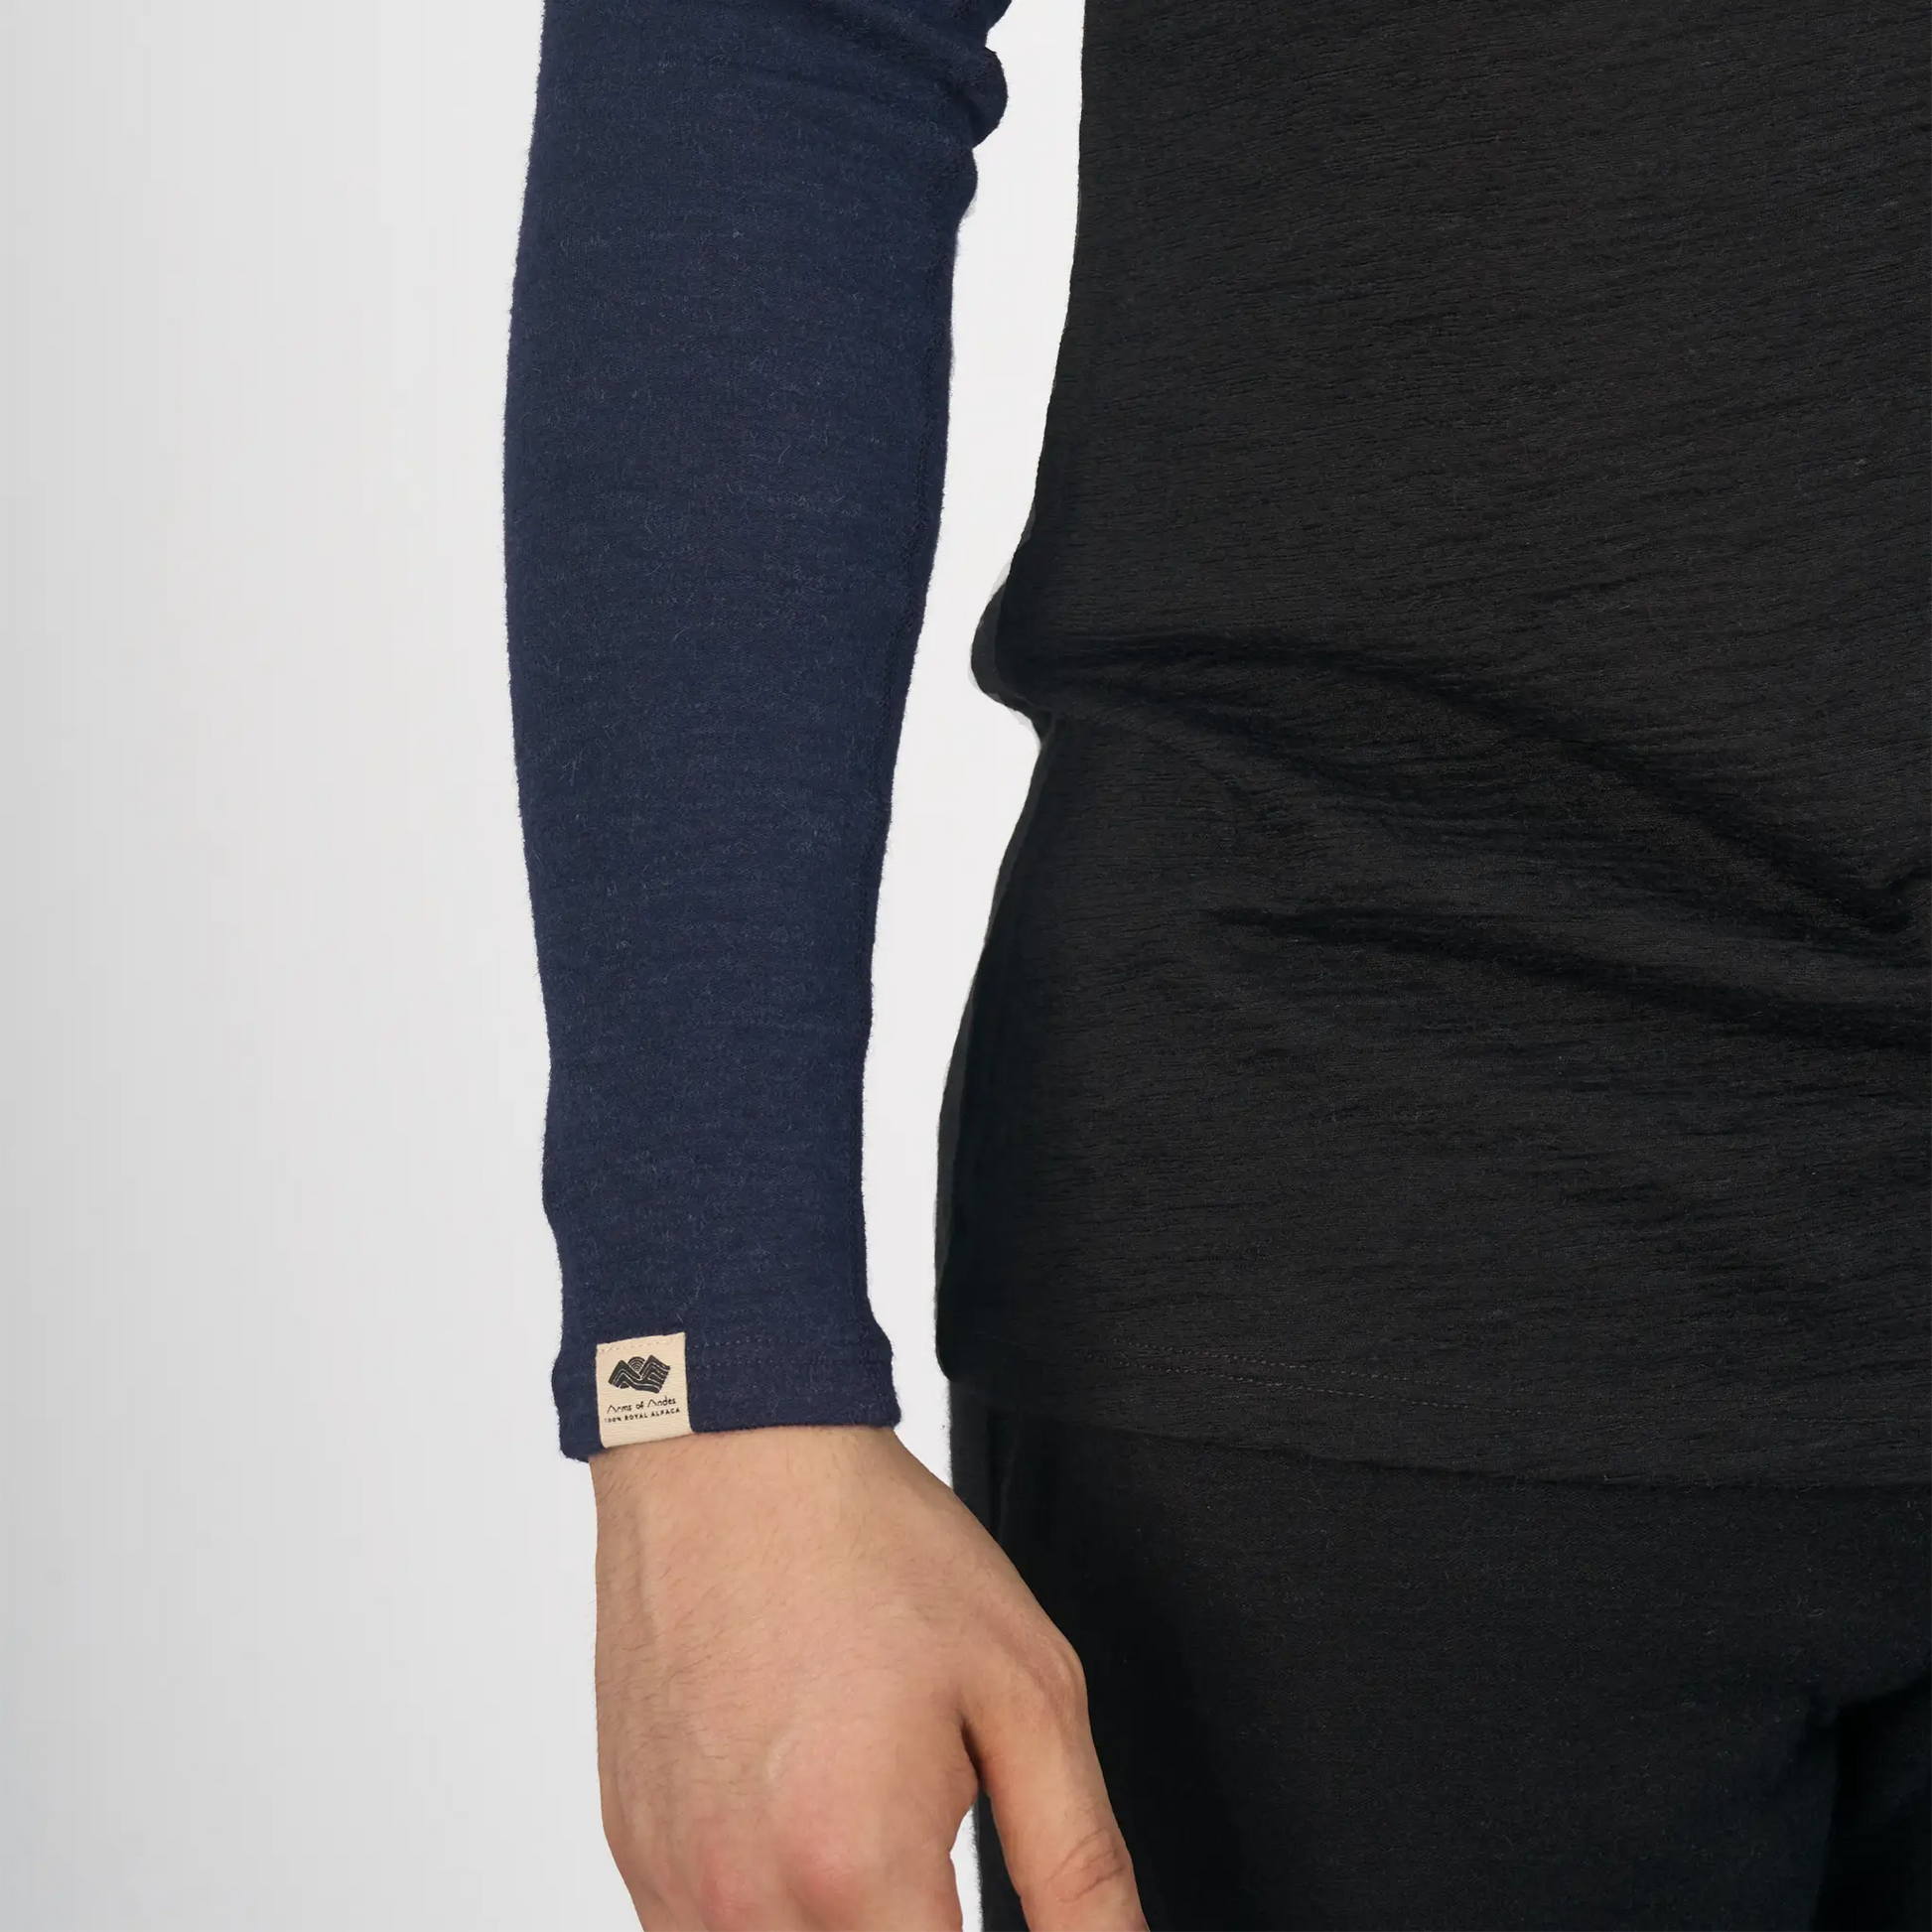 mens moisture wicking sleeve color navy blue